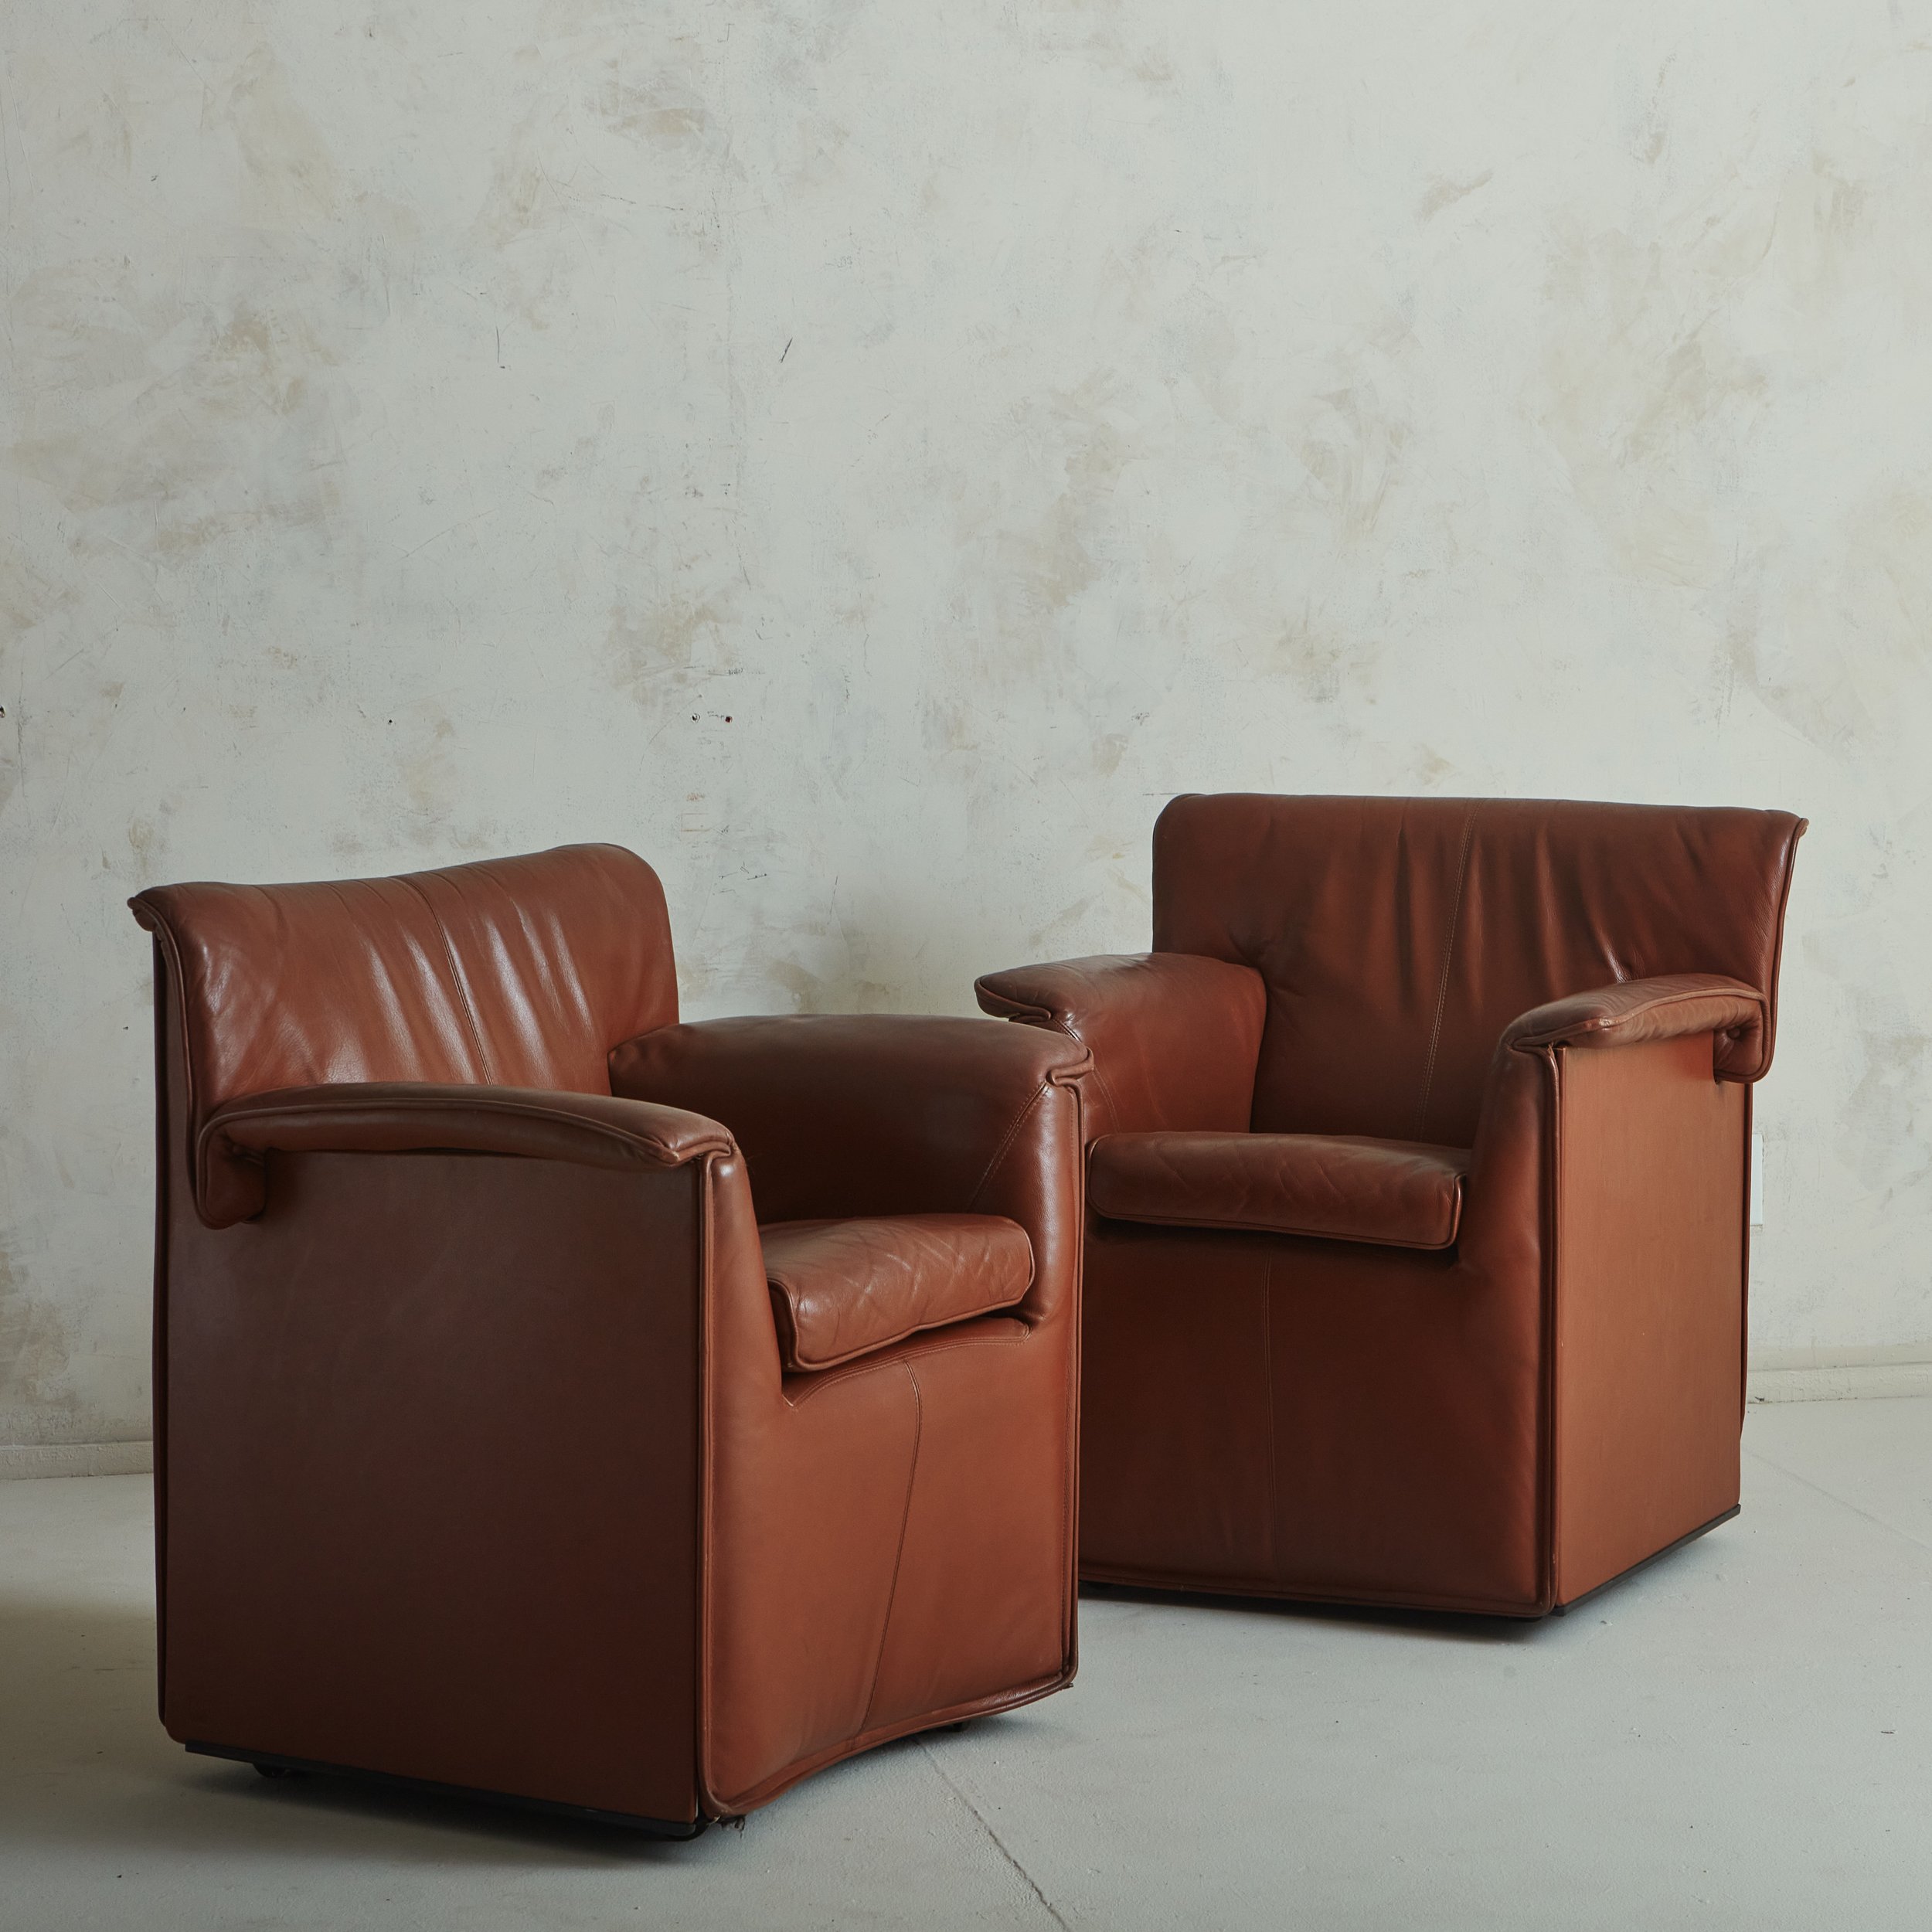 ‘Lauriana’ Chairs in Cognac Leather by Afra + Tobia Scarpa for B&B Italia,  1978 - 7 Available — South Loop Loft